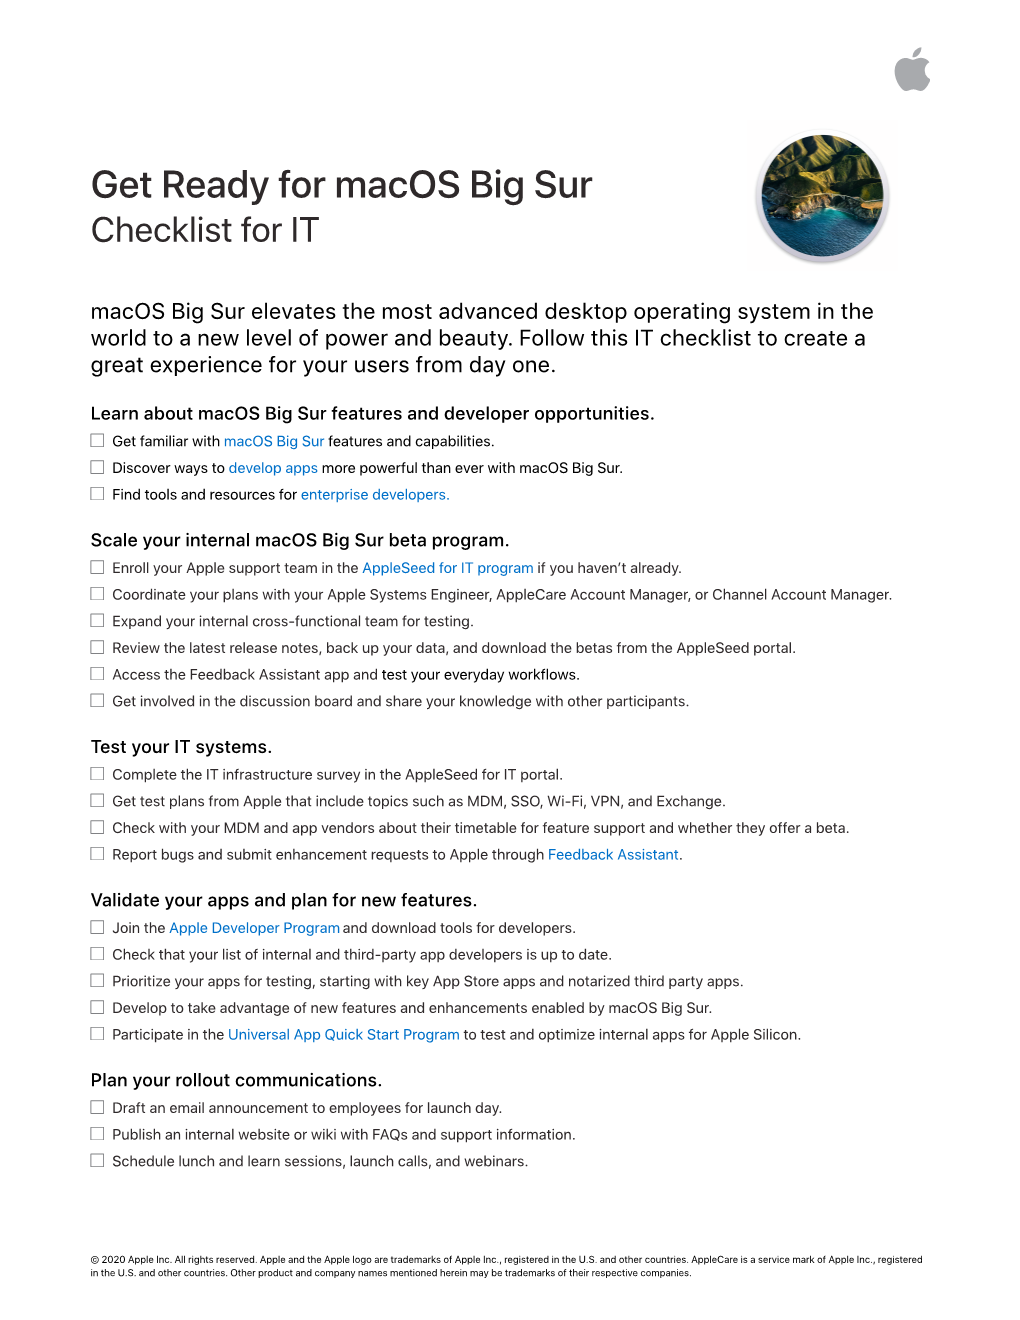 Get Ready for Macos Big Sur Checklist for IT Macos Big Sur Elevates the Most Advanced Desktop Operating System in the World to a New Level of Power and Beauty